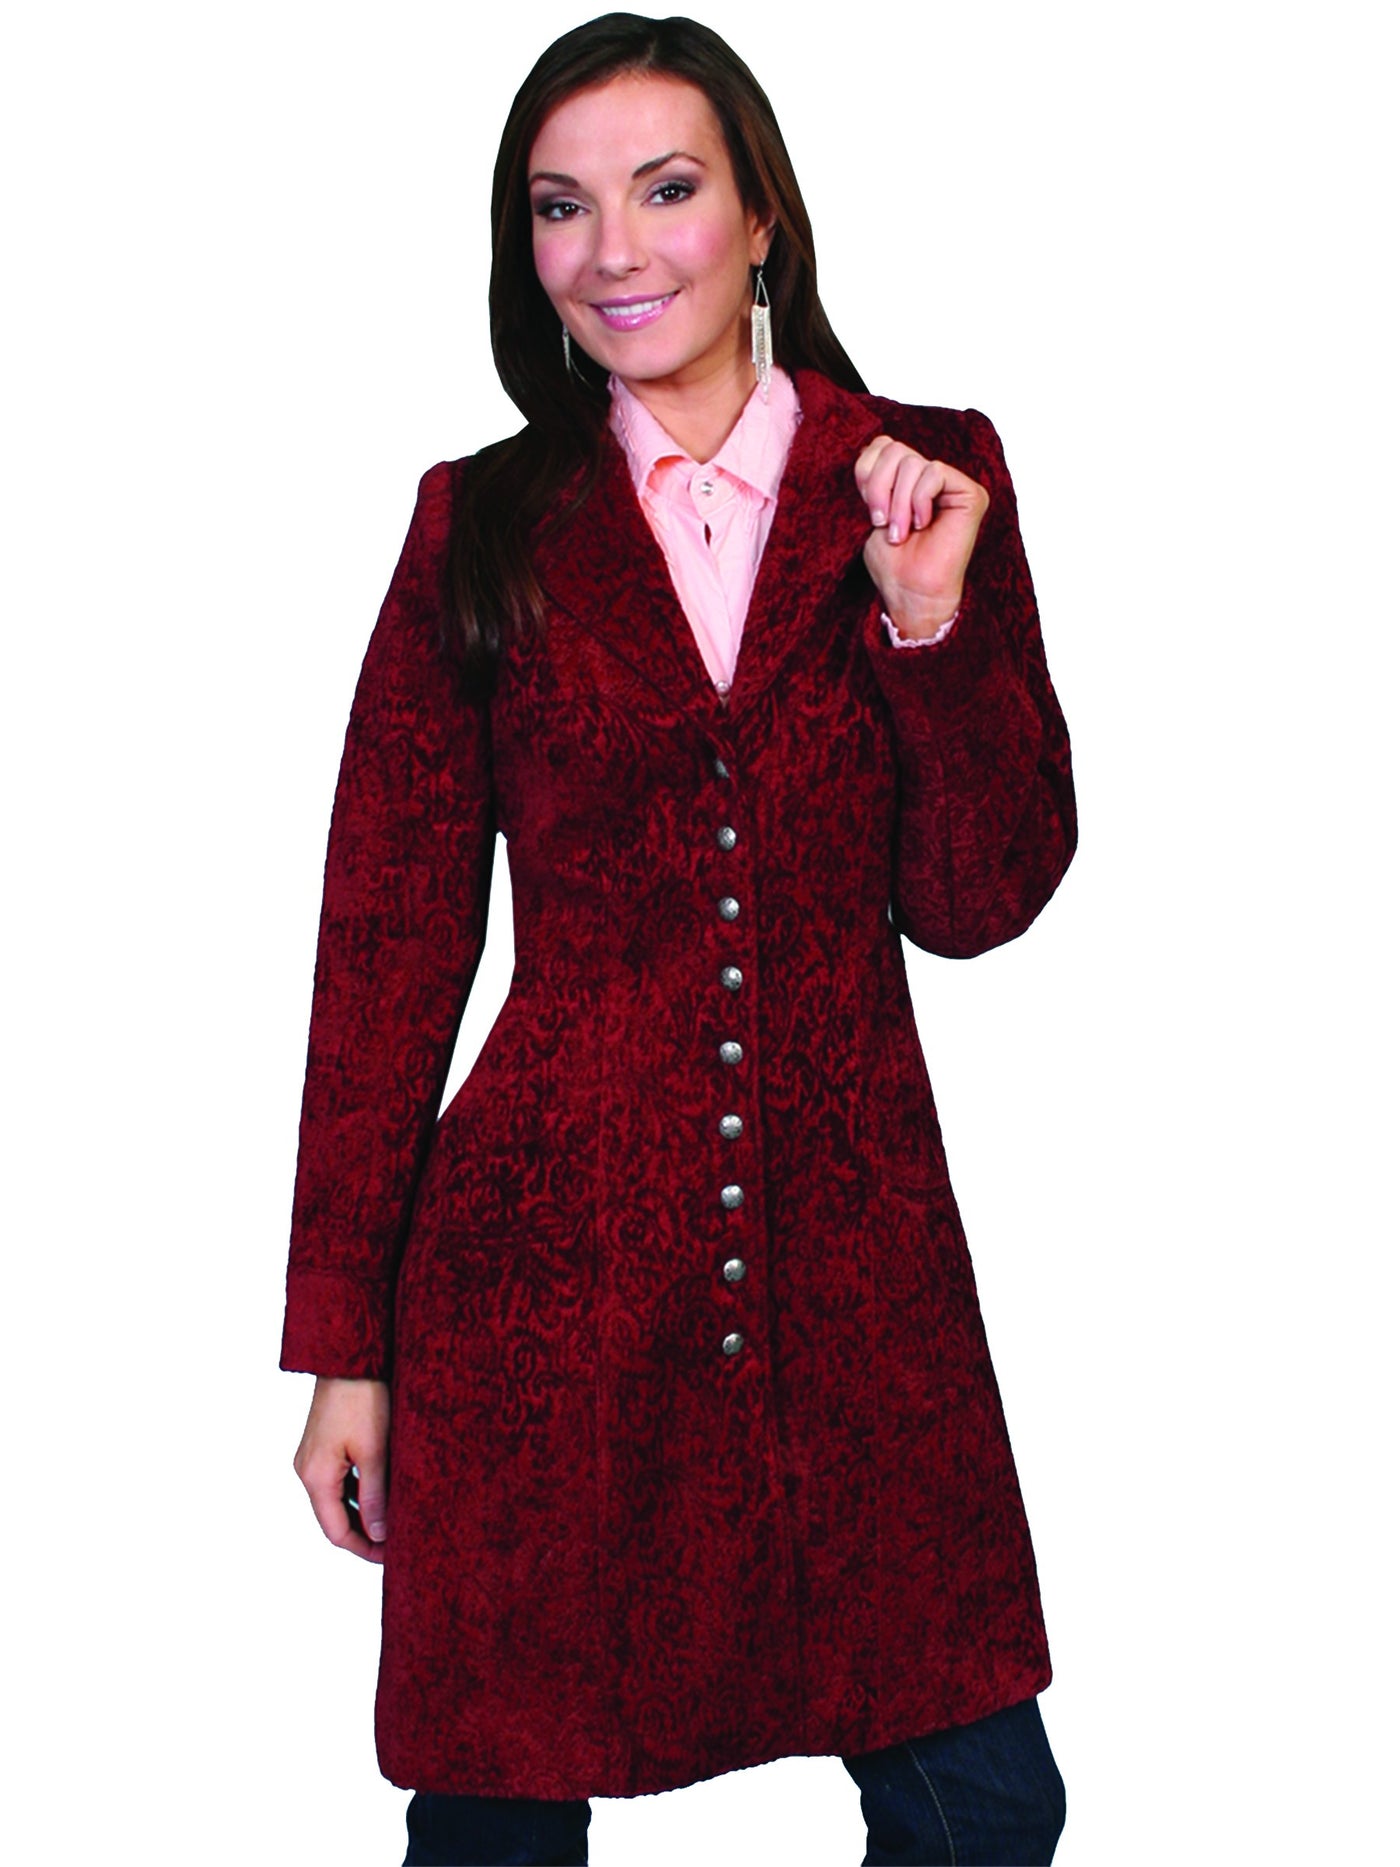 Western Style Chenille Frock Coat in Wine - SOLD OUT